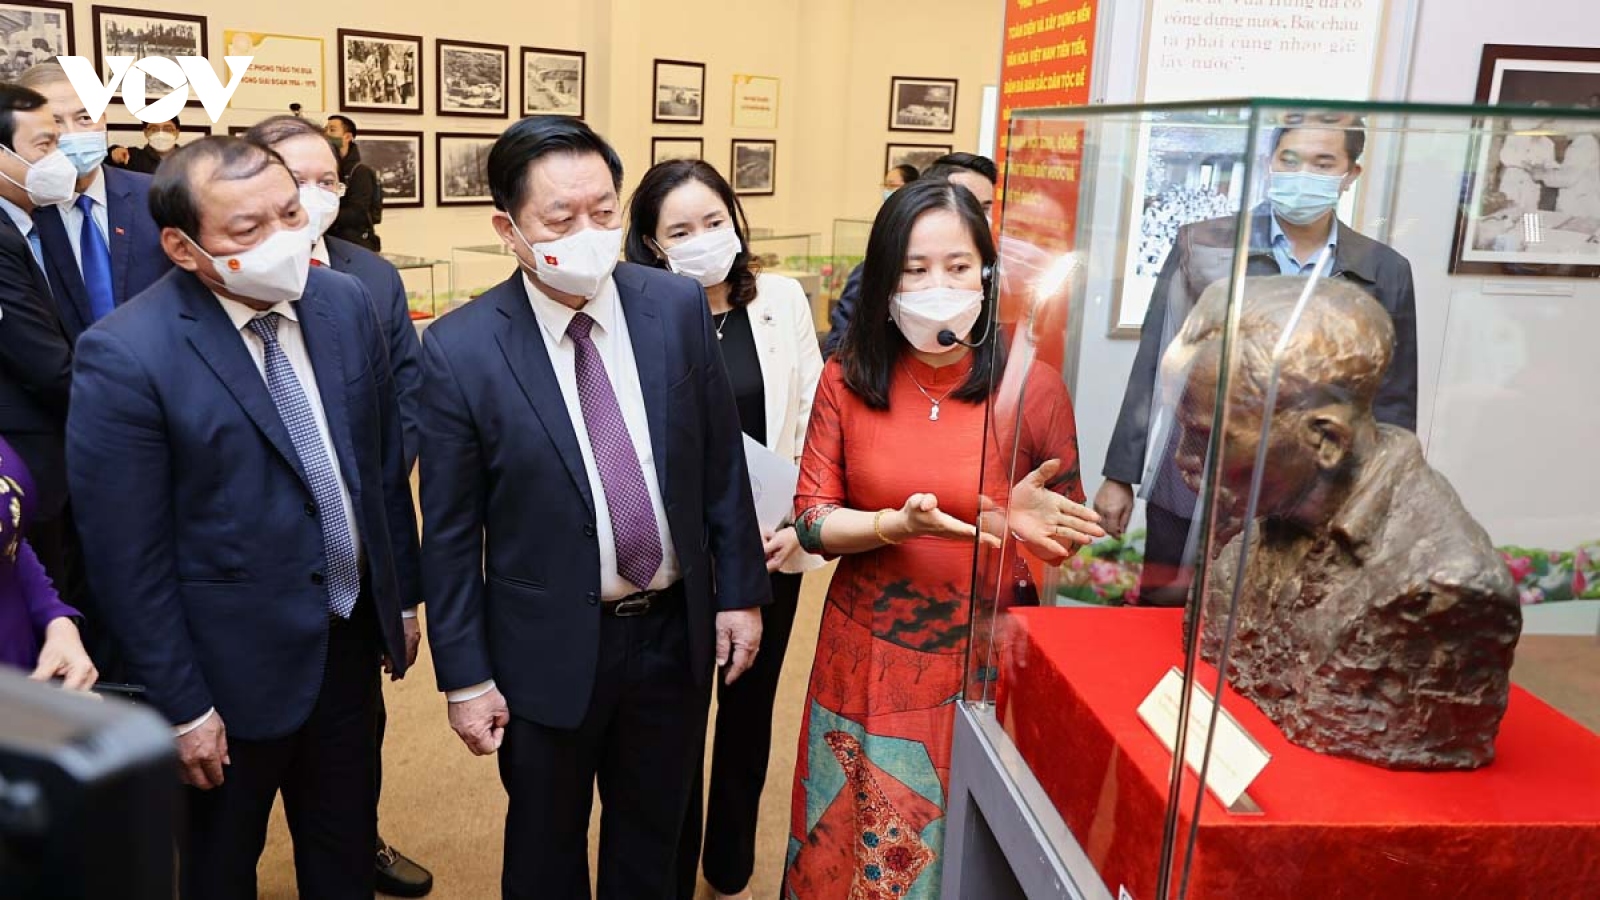 Valuable materials, artefacts on show at national cultural exhibition